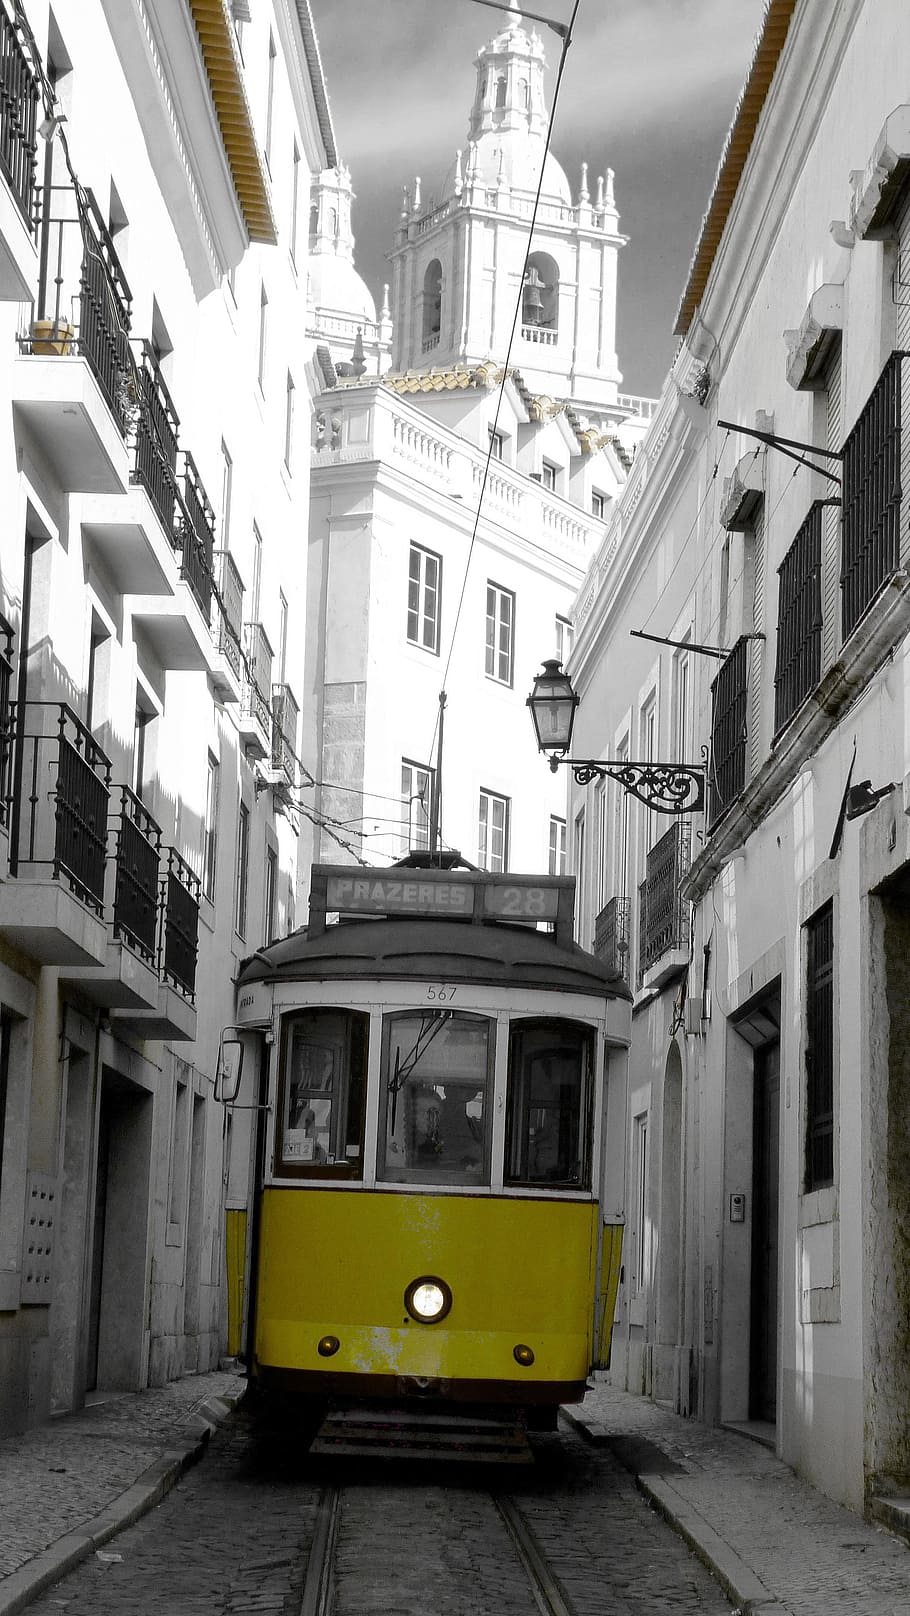 yellow, white, train, building structures, tram, transport, means of transport, architecture, lisbon, old town